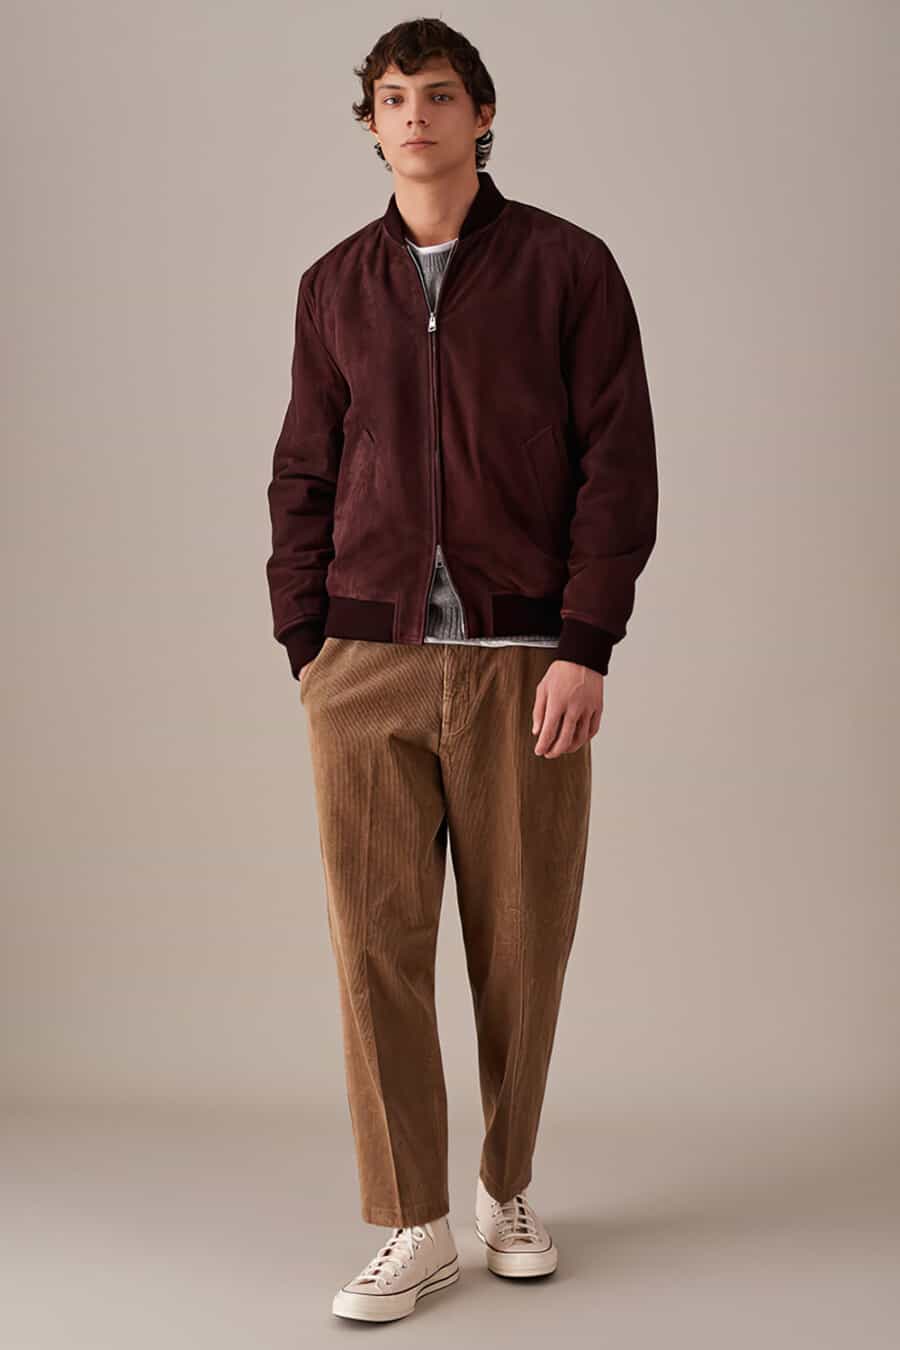 Men's brown corduroy trousers, white T-shirt, grey sweater, burgundy suede bomber jacket and white Converse high top sneakers outfit